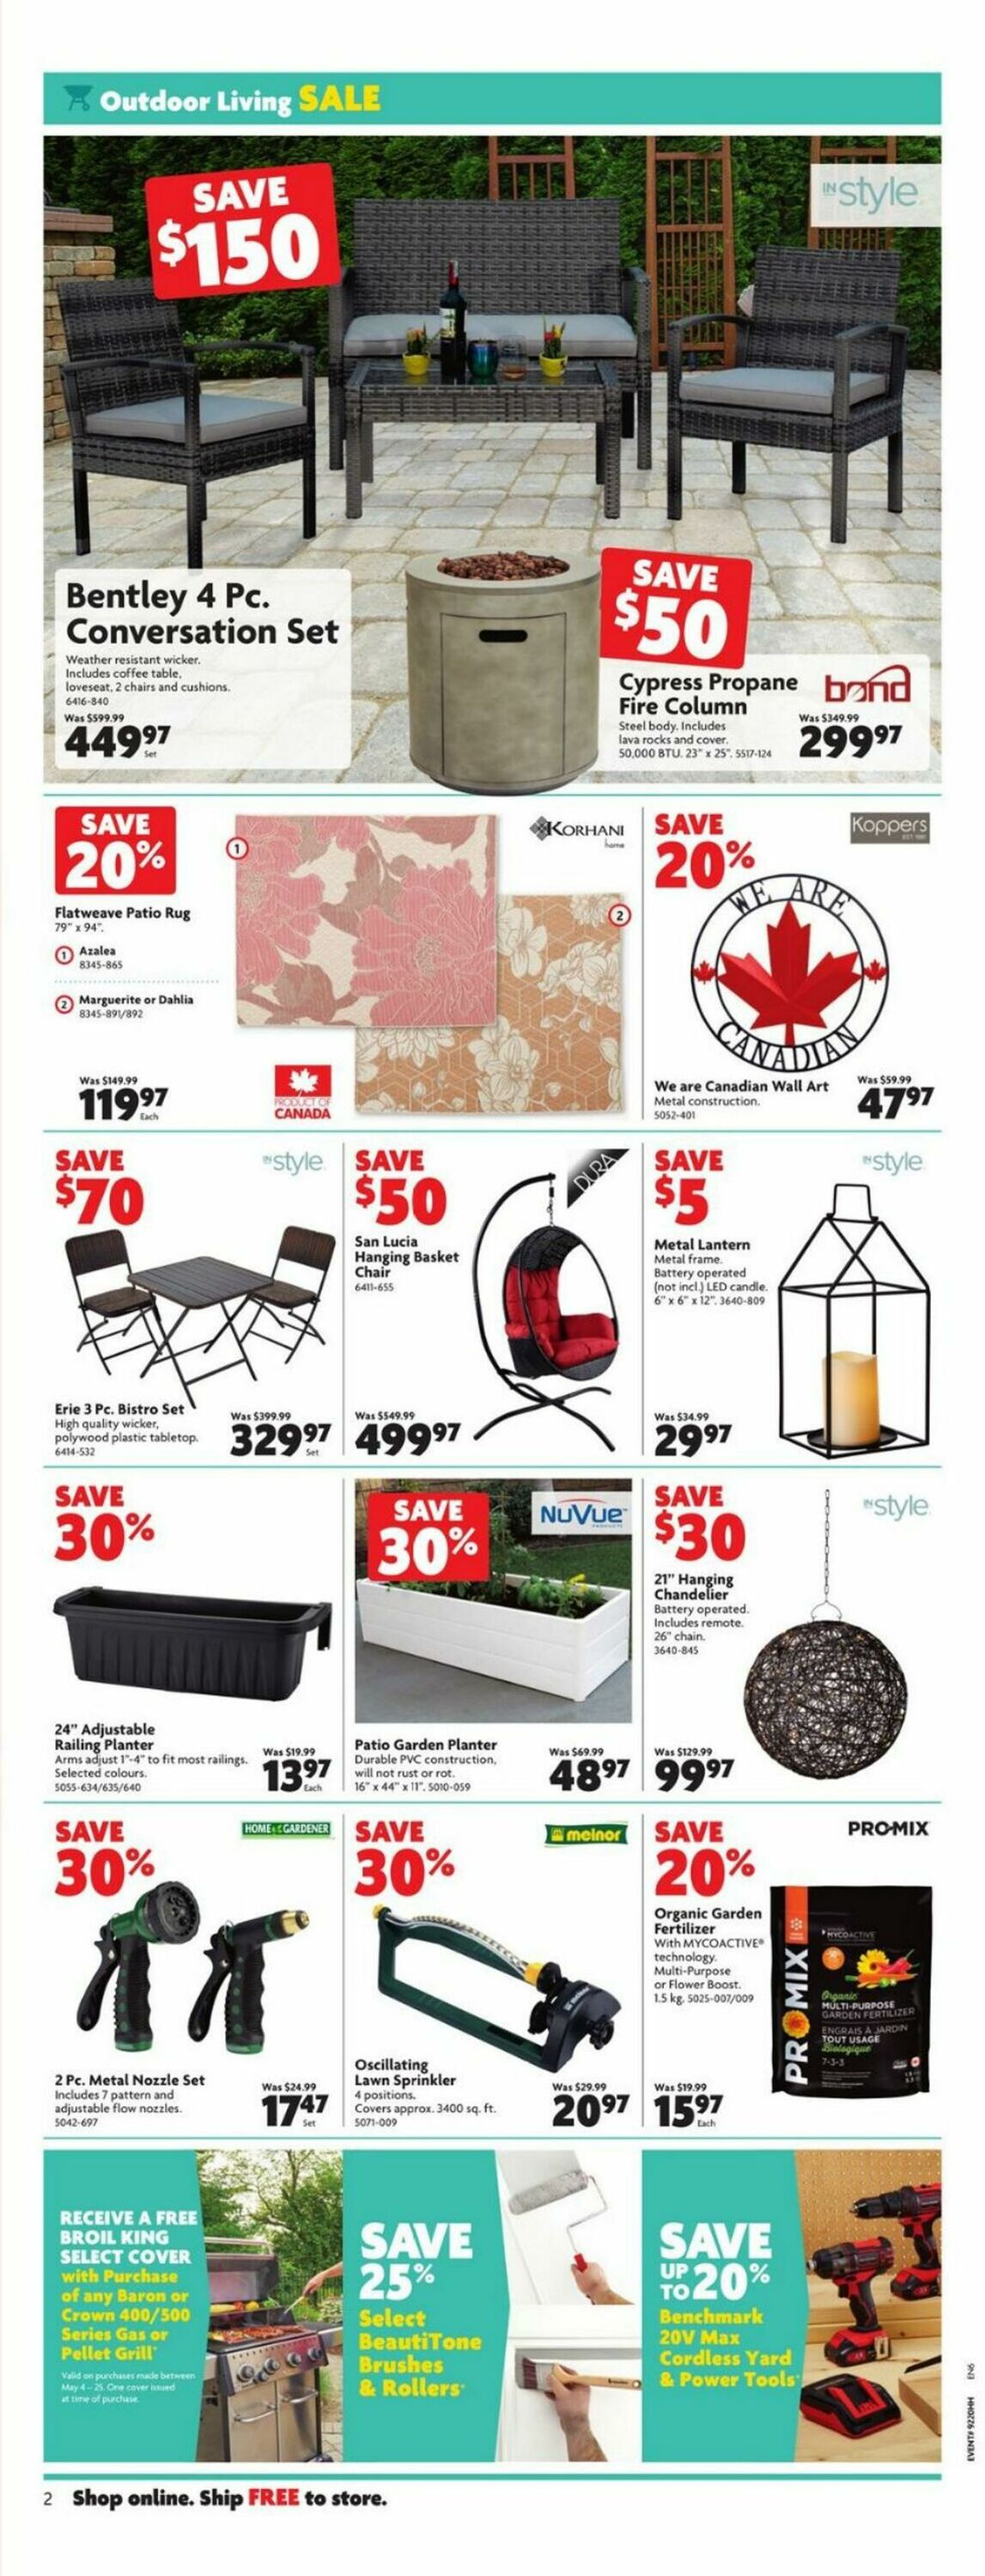 Circulaire Home Hardware 12.05.2022 - 18.05.2022